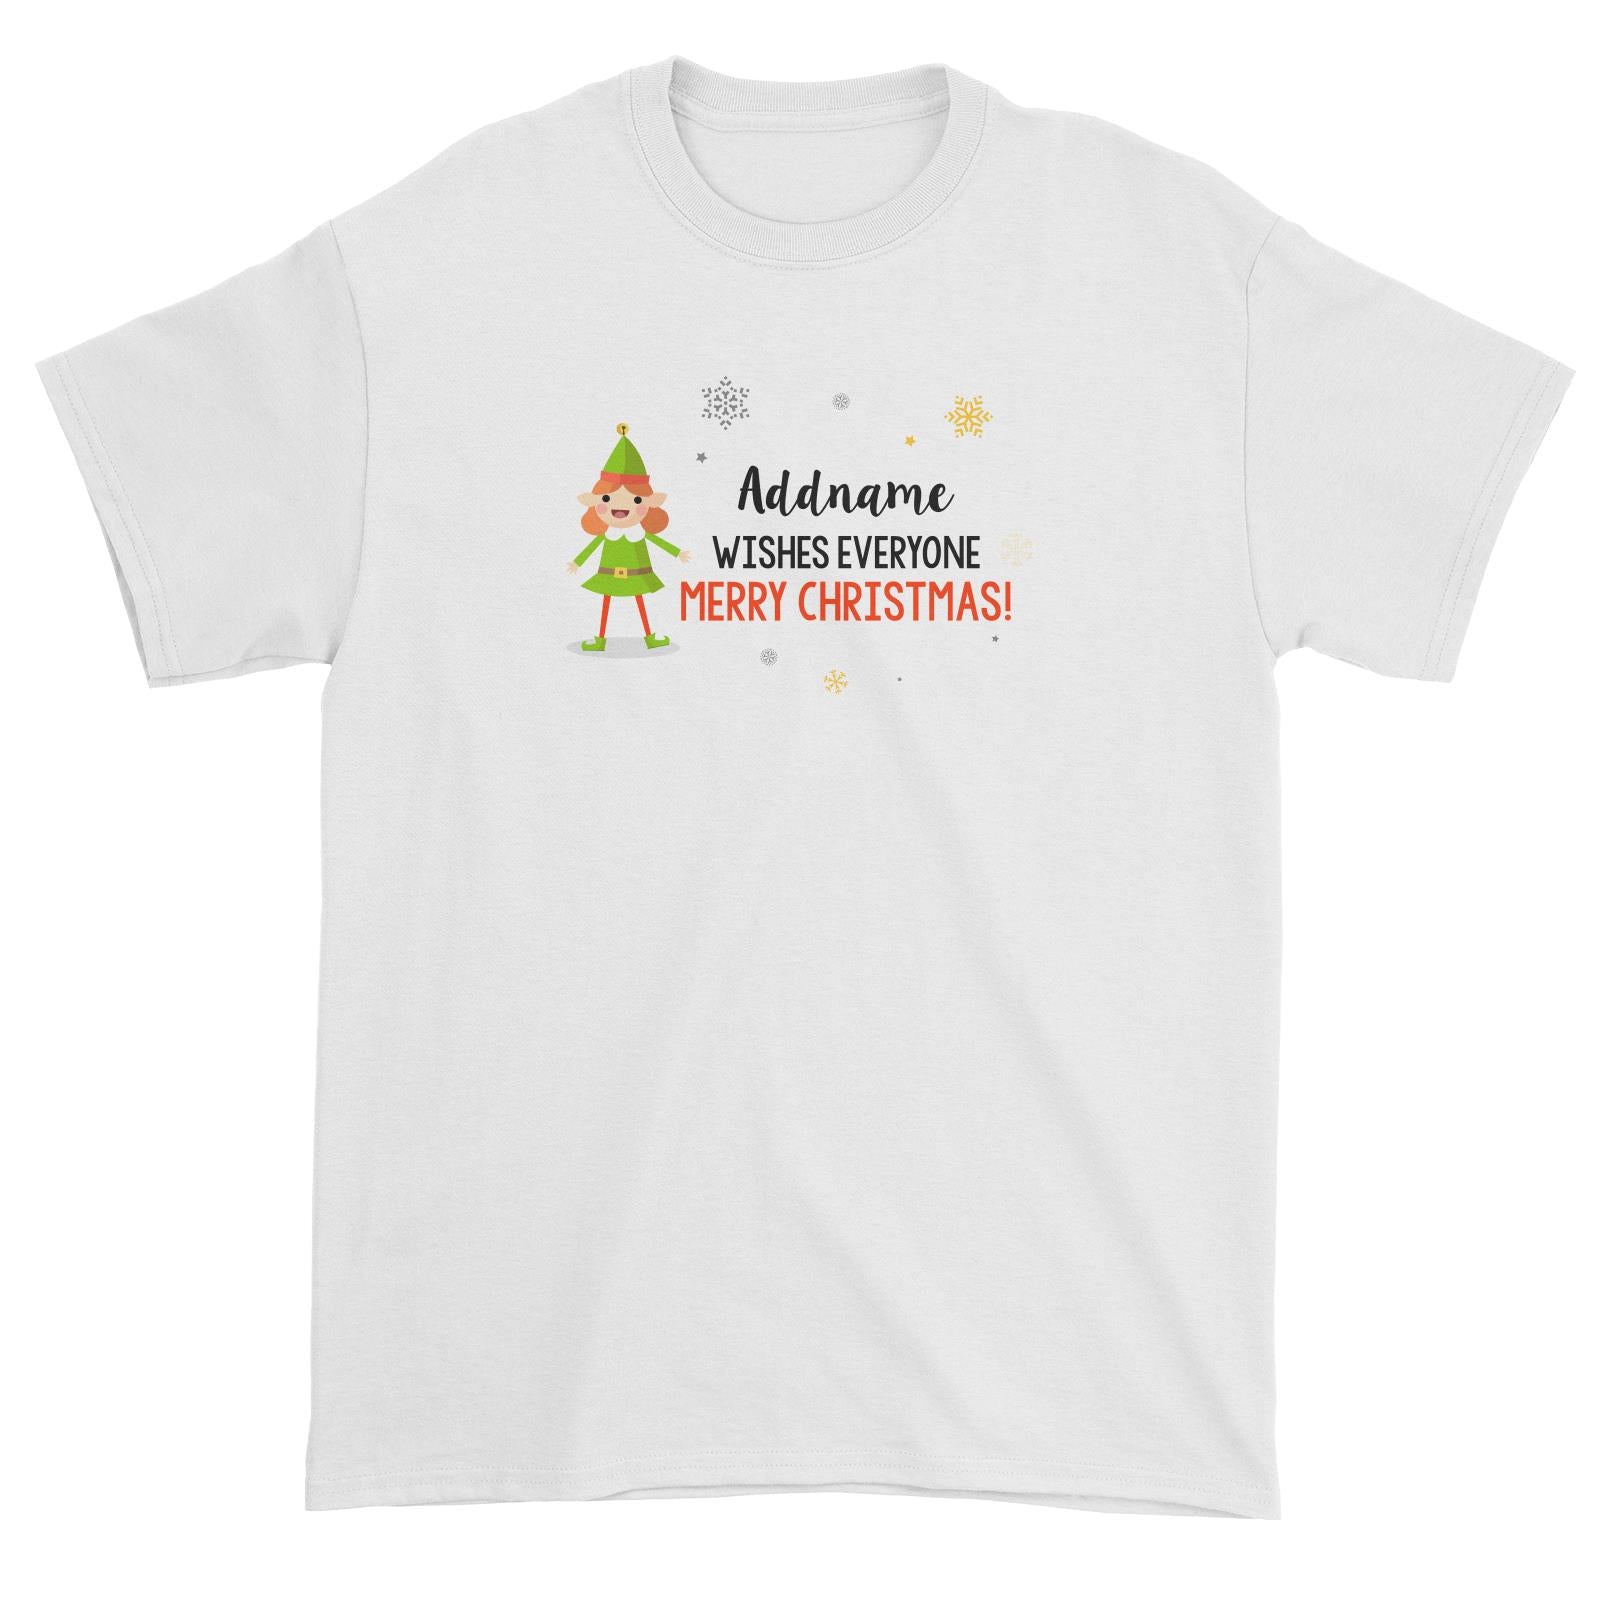 Cute Elf Girl Wishes Evryone Merry Christmas Addname Unisex T-Shirt  Matching Family Personalizable Designs